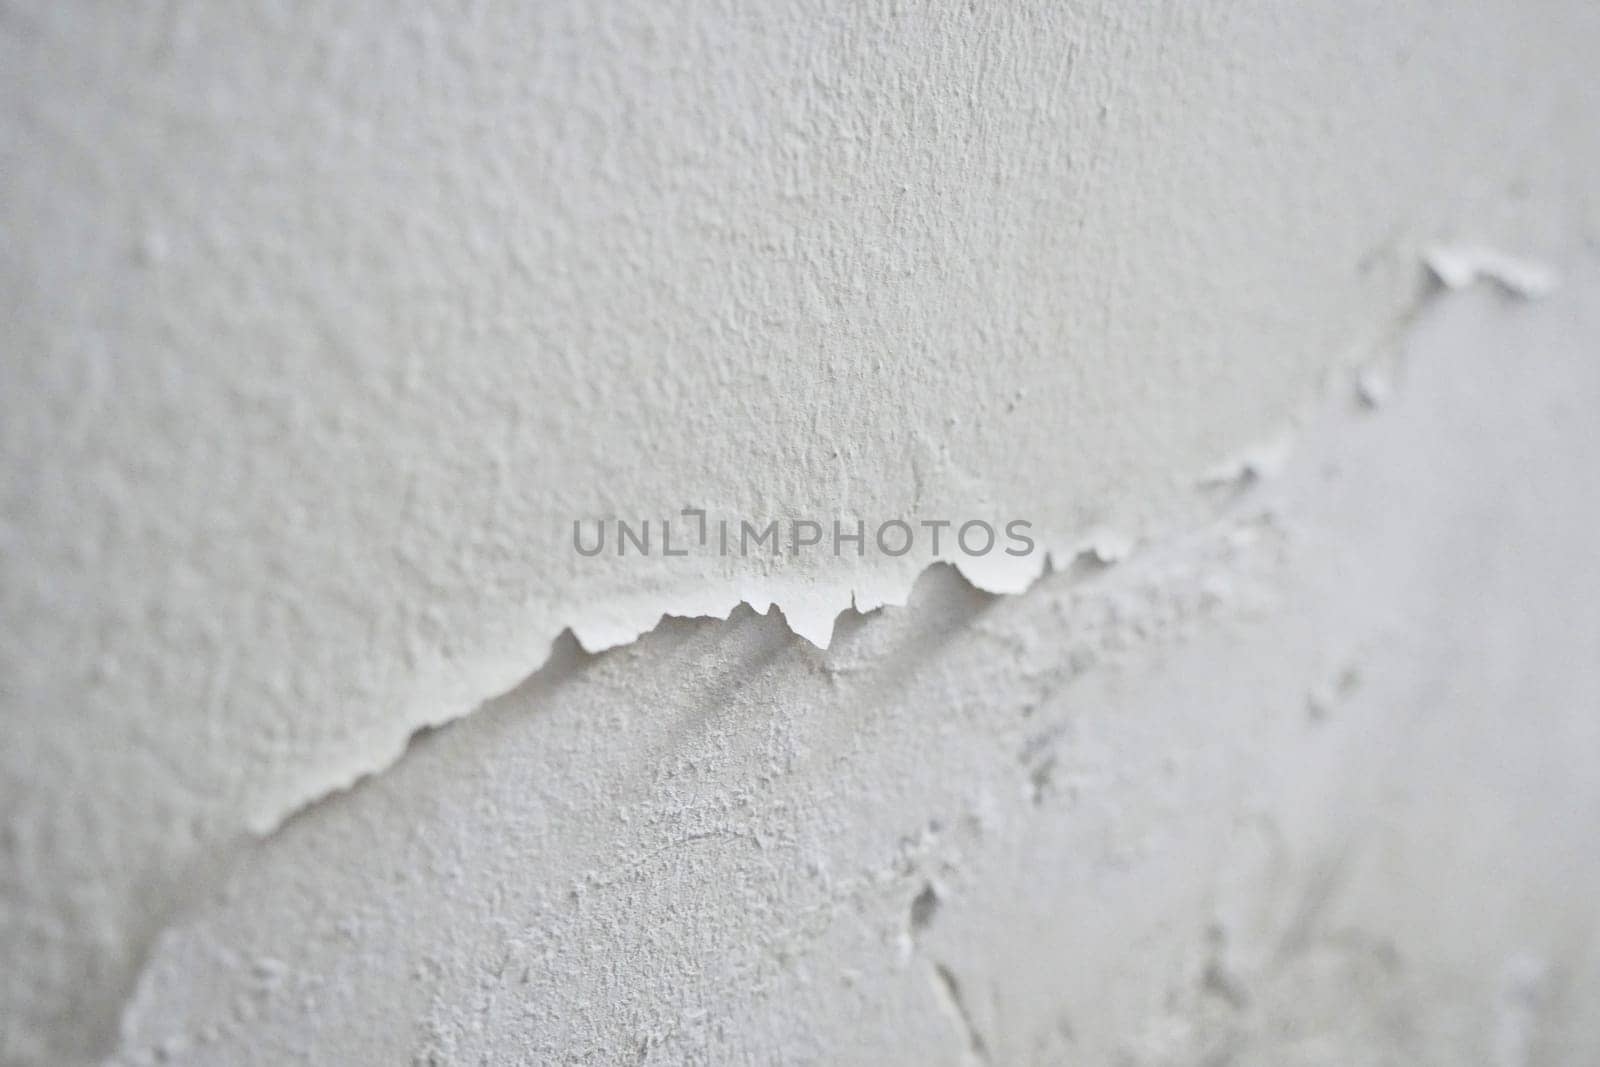 Paint swelling on the wall due to moisture, damp wall samples, damp wall and damage to the paint, by nhatipoglu